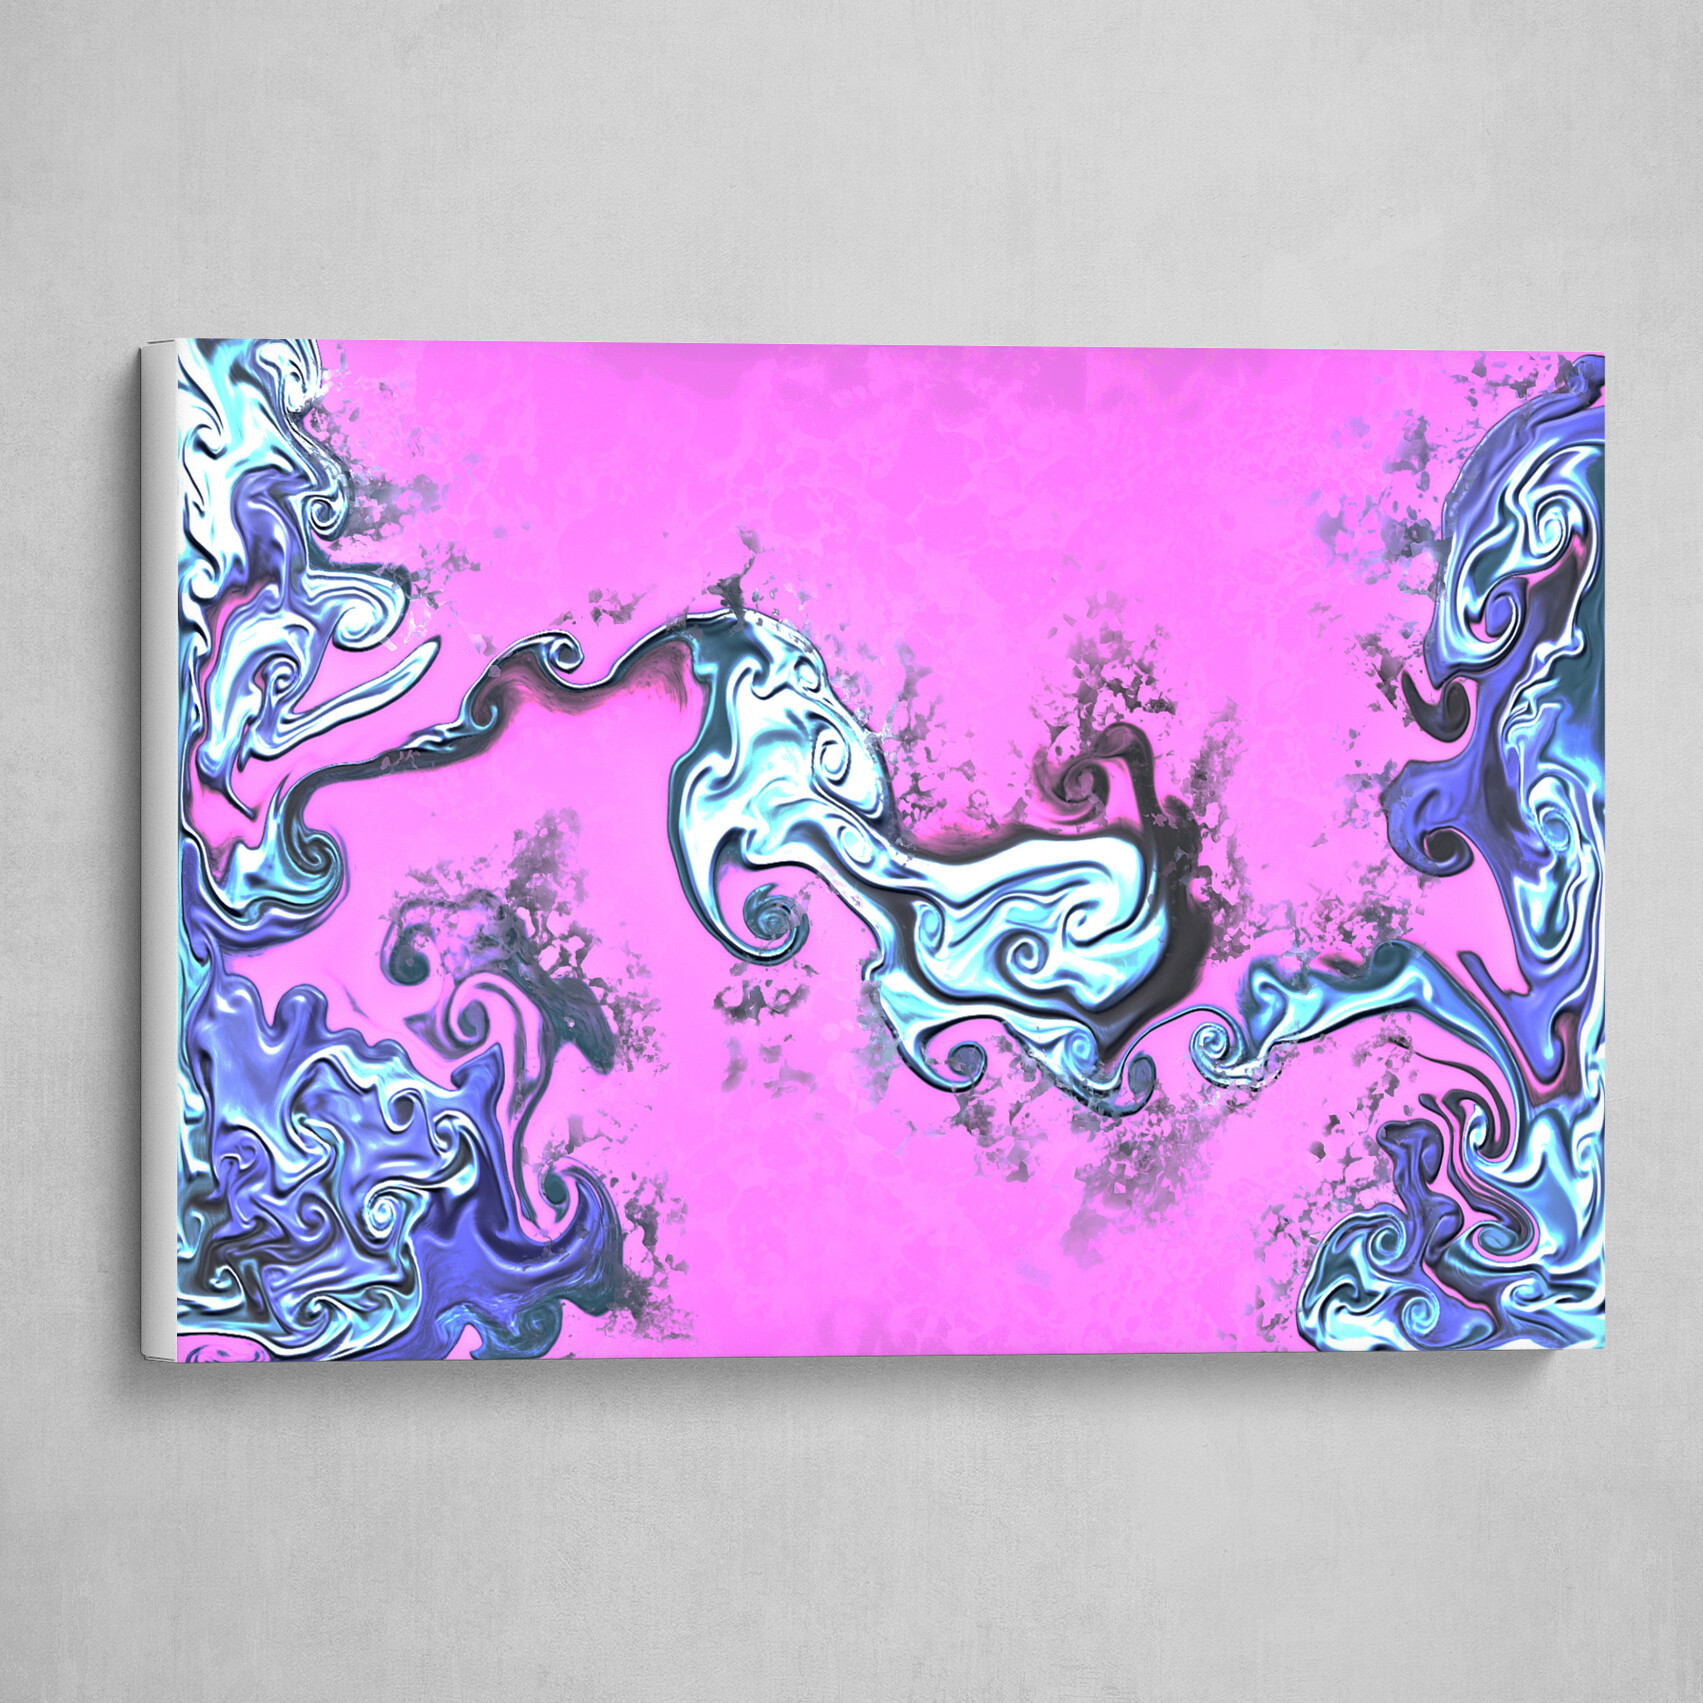 Blue and Pink fluid pour abstract art 3